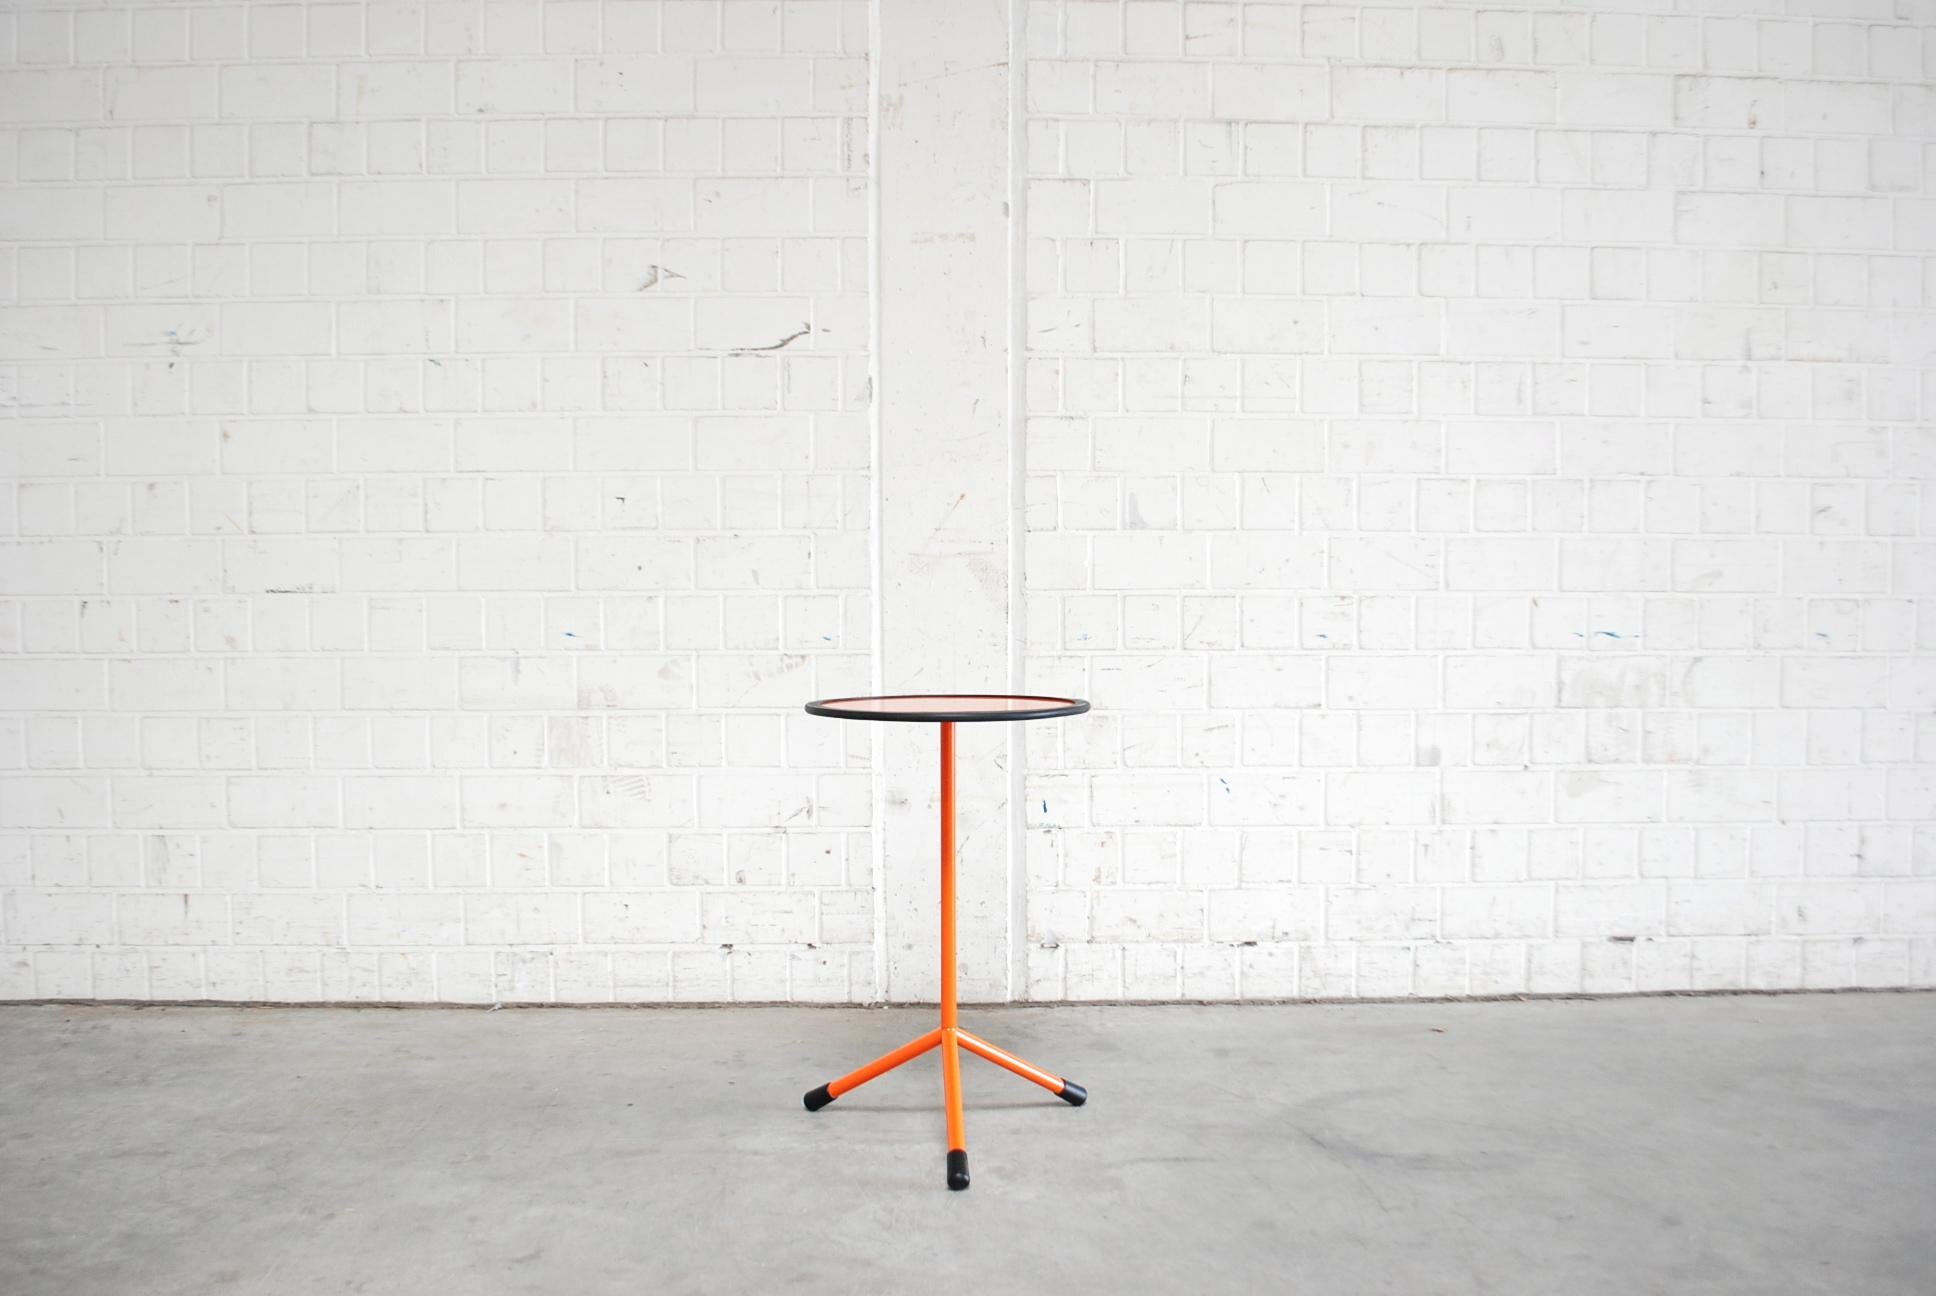 A simple Industrial round table in aluminum lacquered in orange colour.
The edges on the top were covered with rubber and the feet also.
The high table is available in green colour and also a low round table in white is in stock.
See the last